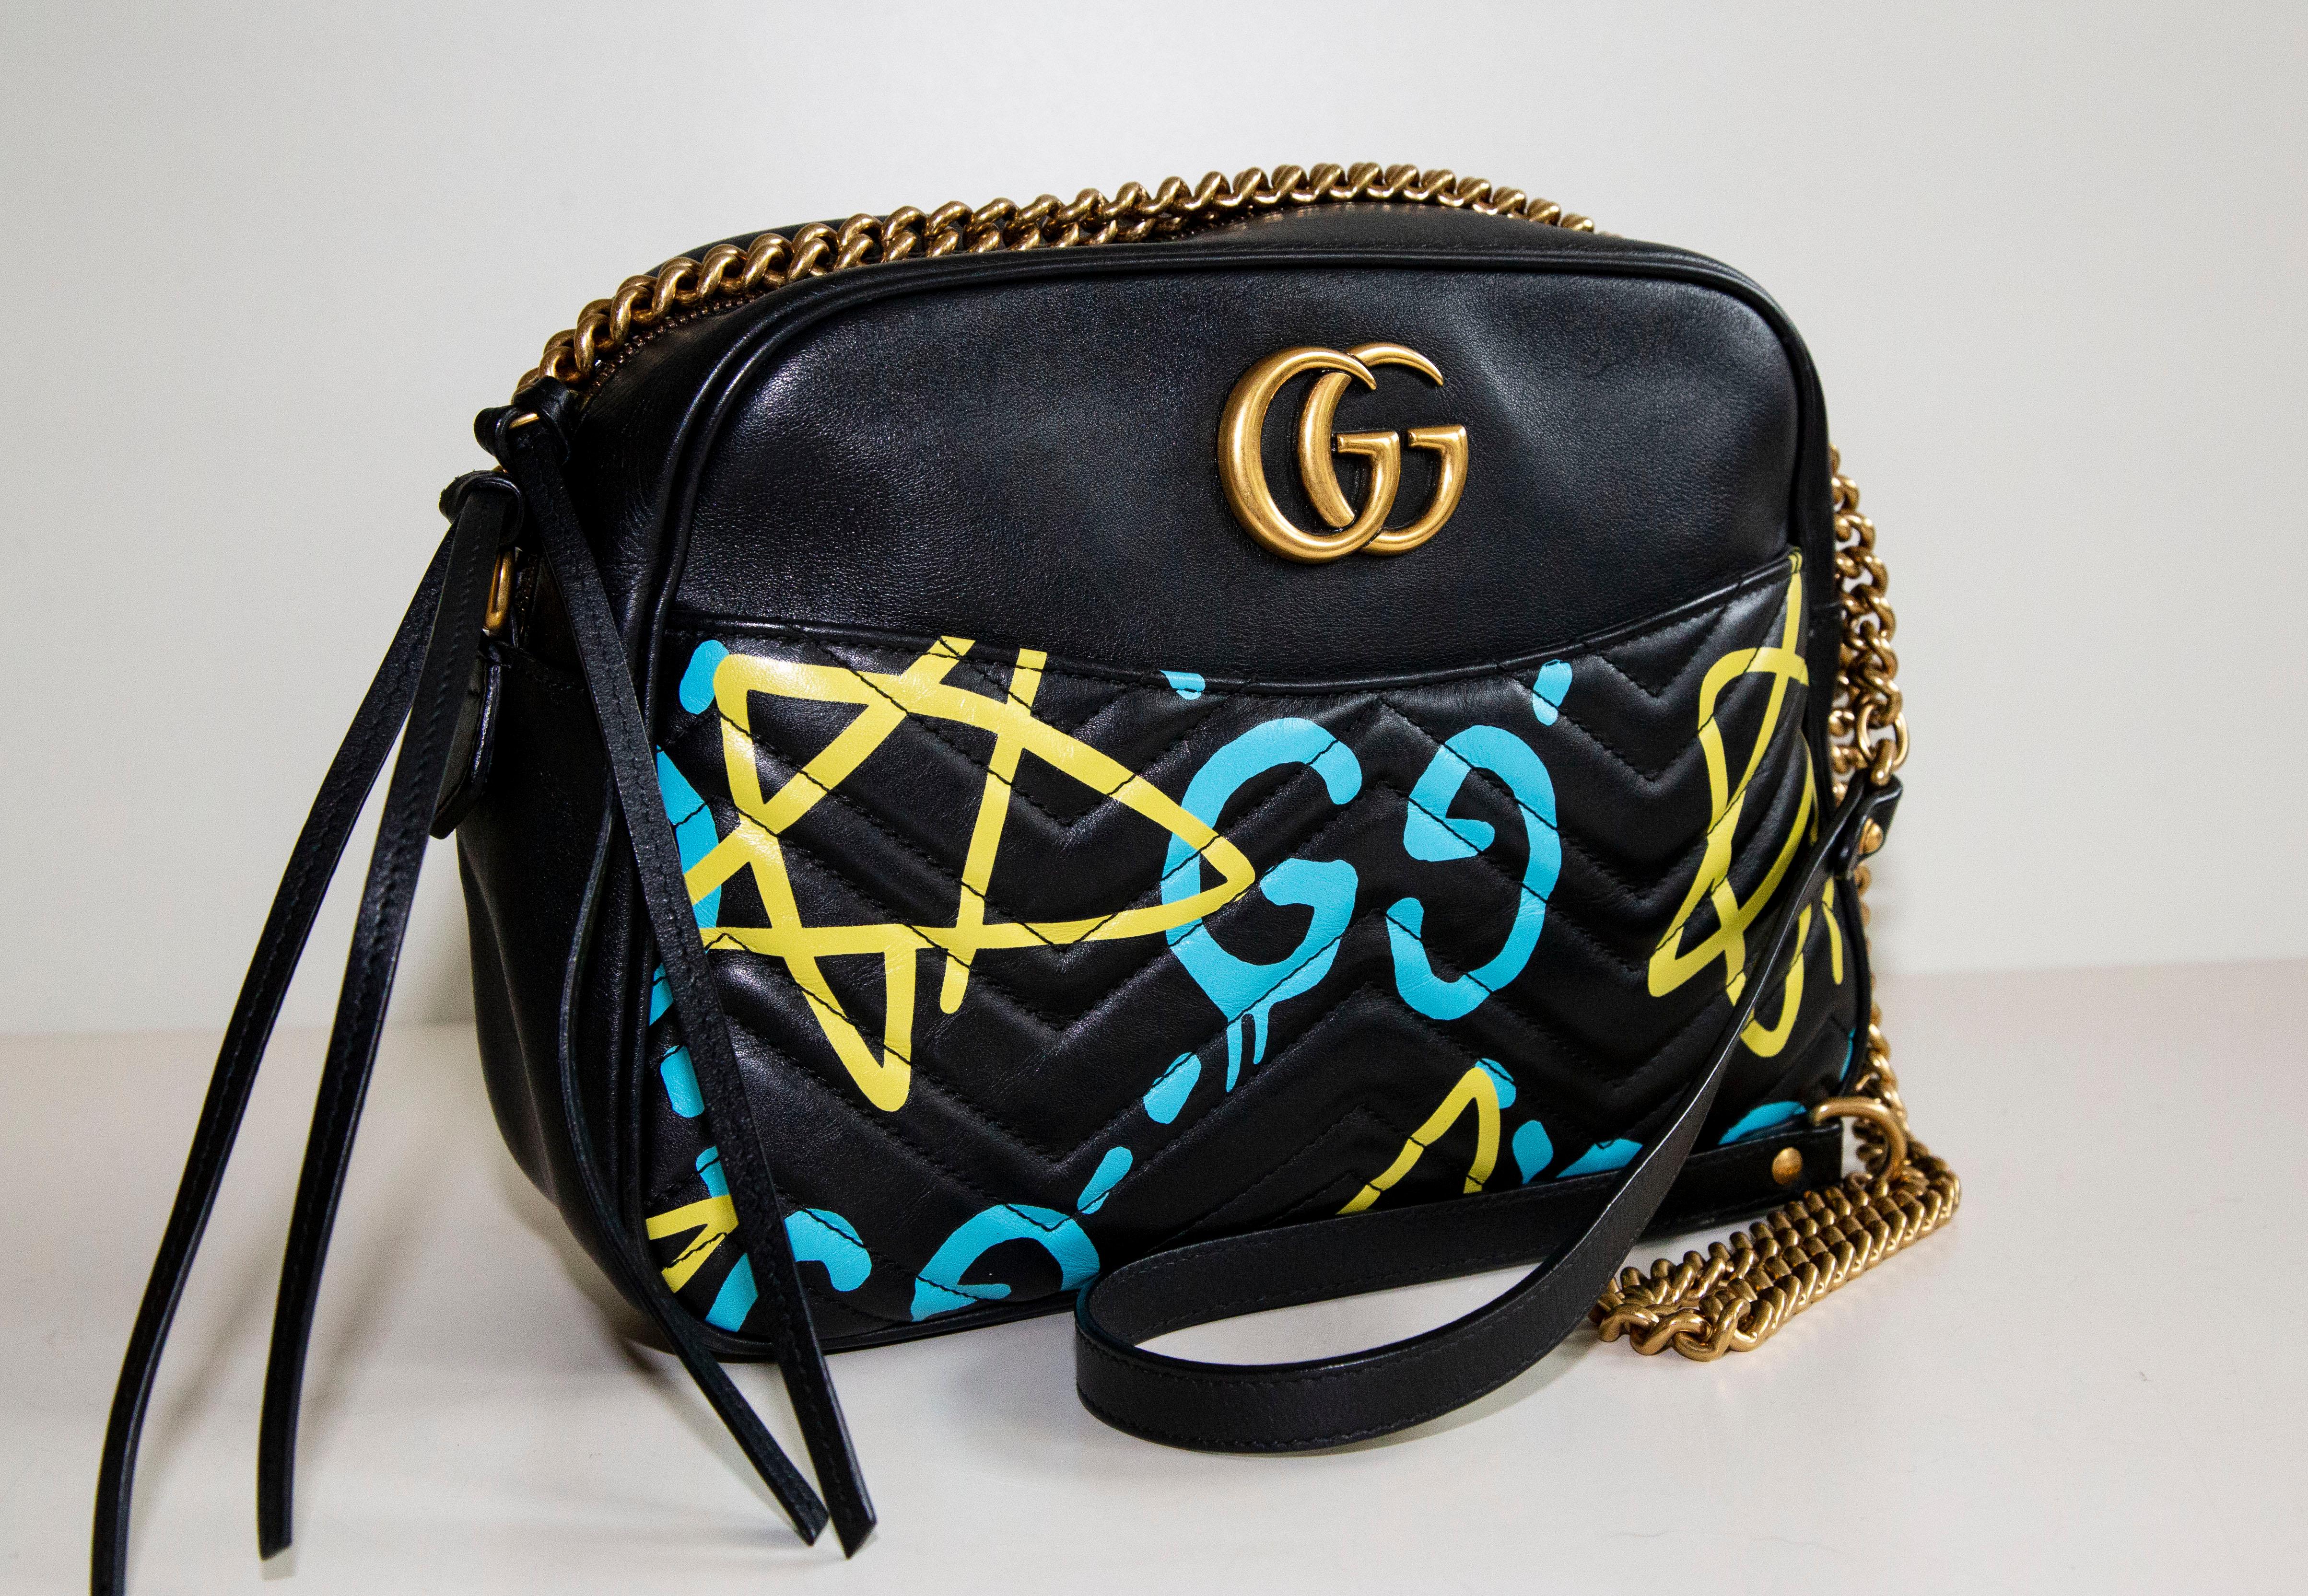 An authentic Gucci Ghost chain crossbody bag. The bag features limited edition spray paint and a handwritten style design. The exterior is made out of soft black leather and gold-tone hardware. The interior is lined with soft beige suede and there